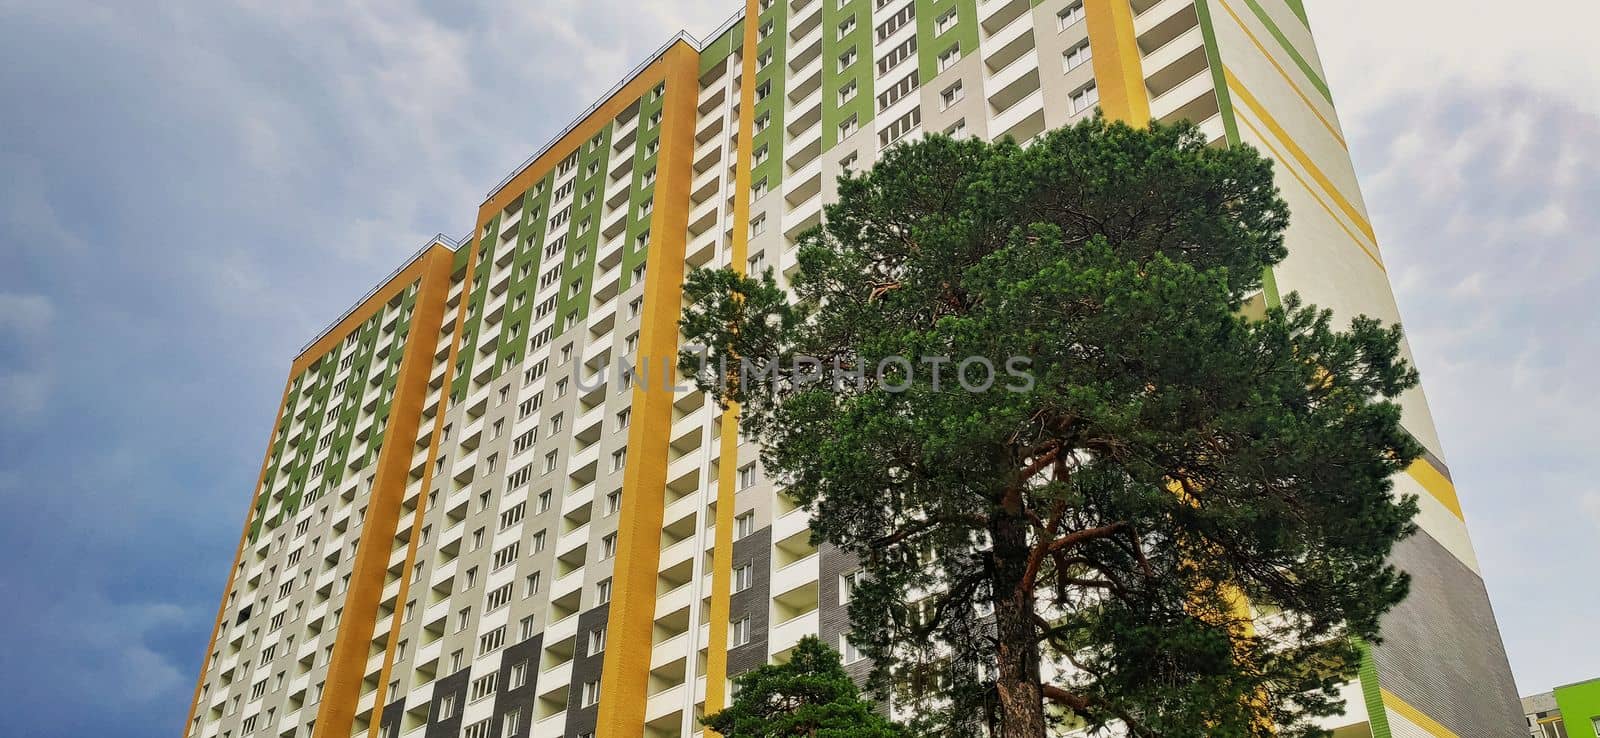 modern new apartment building on blue sky background